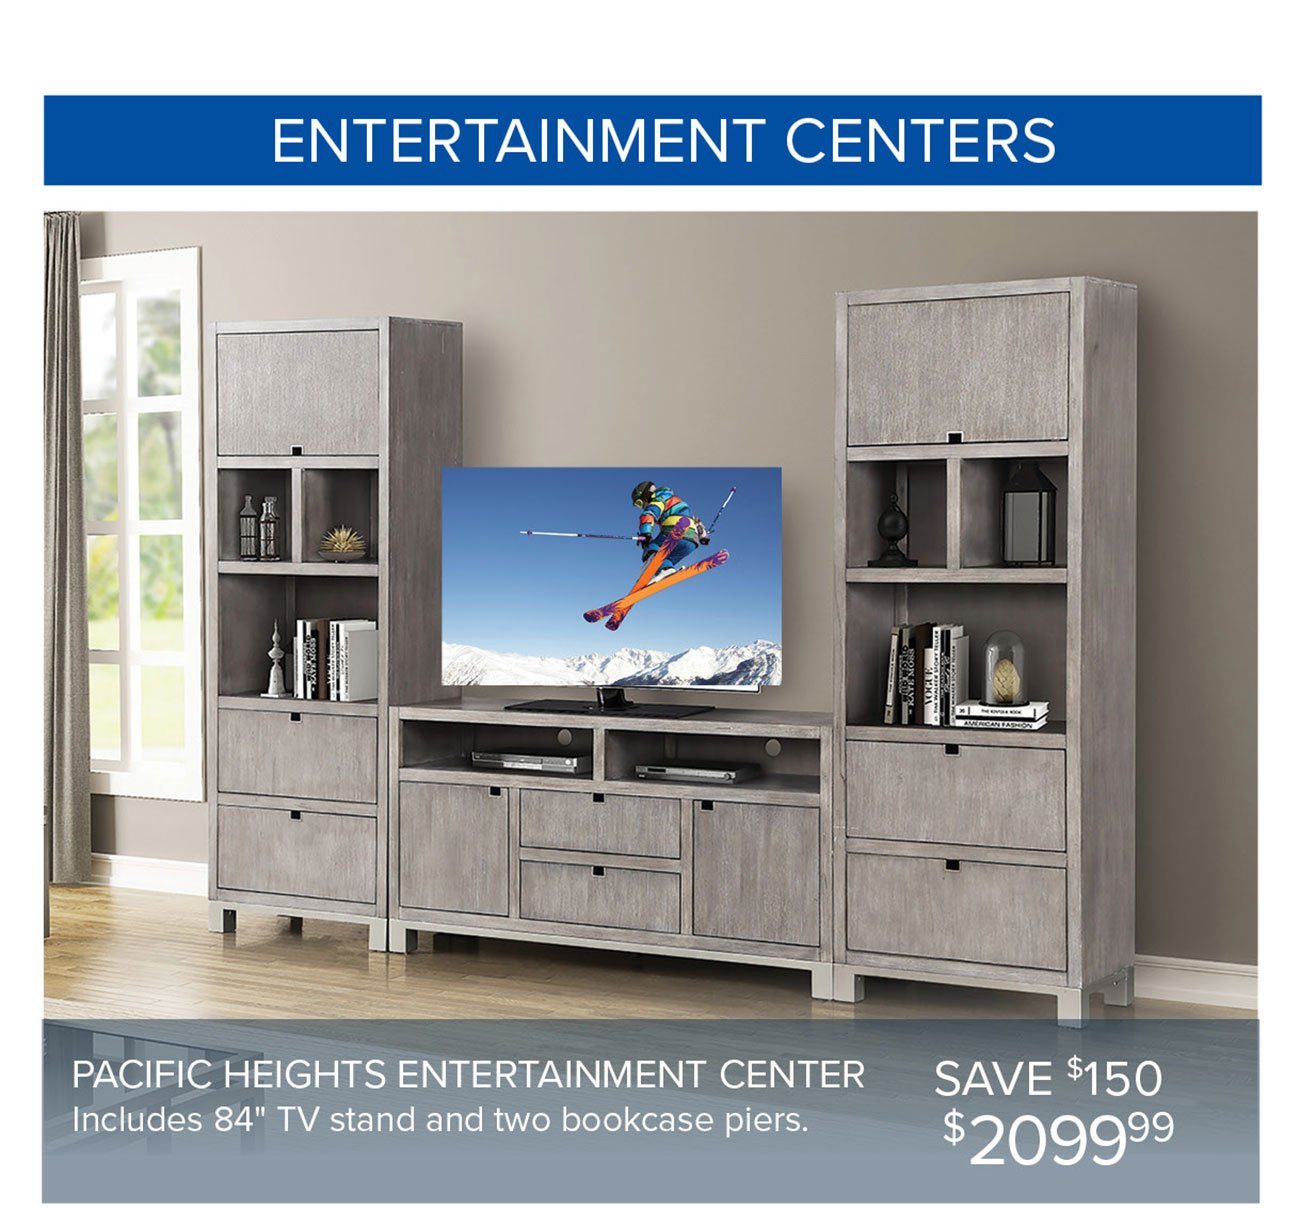 Pacfic-heights-entertainment-center